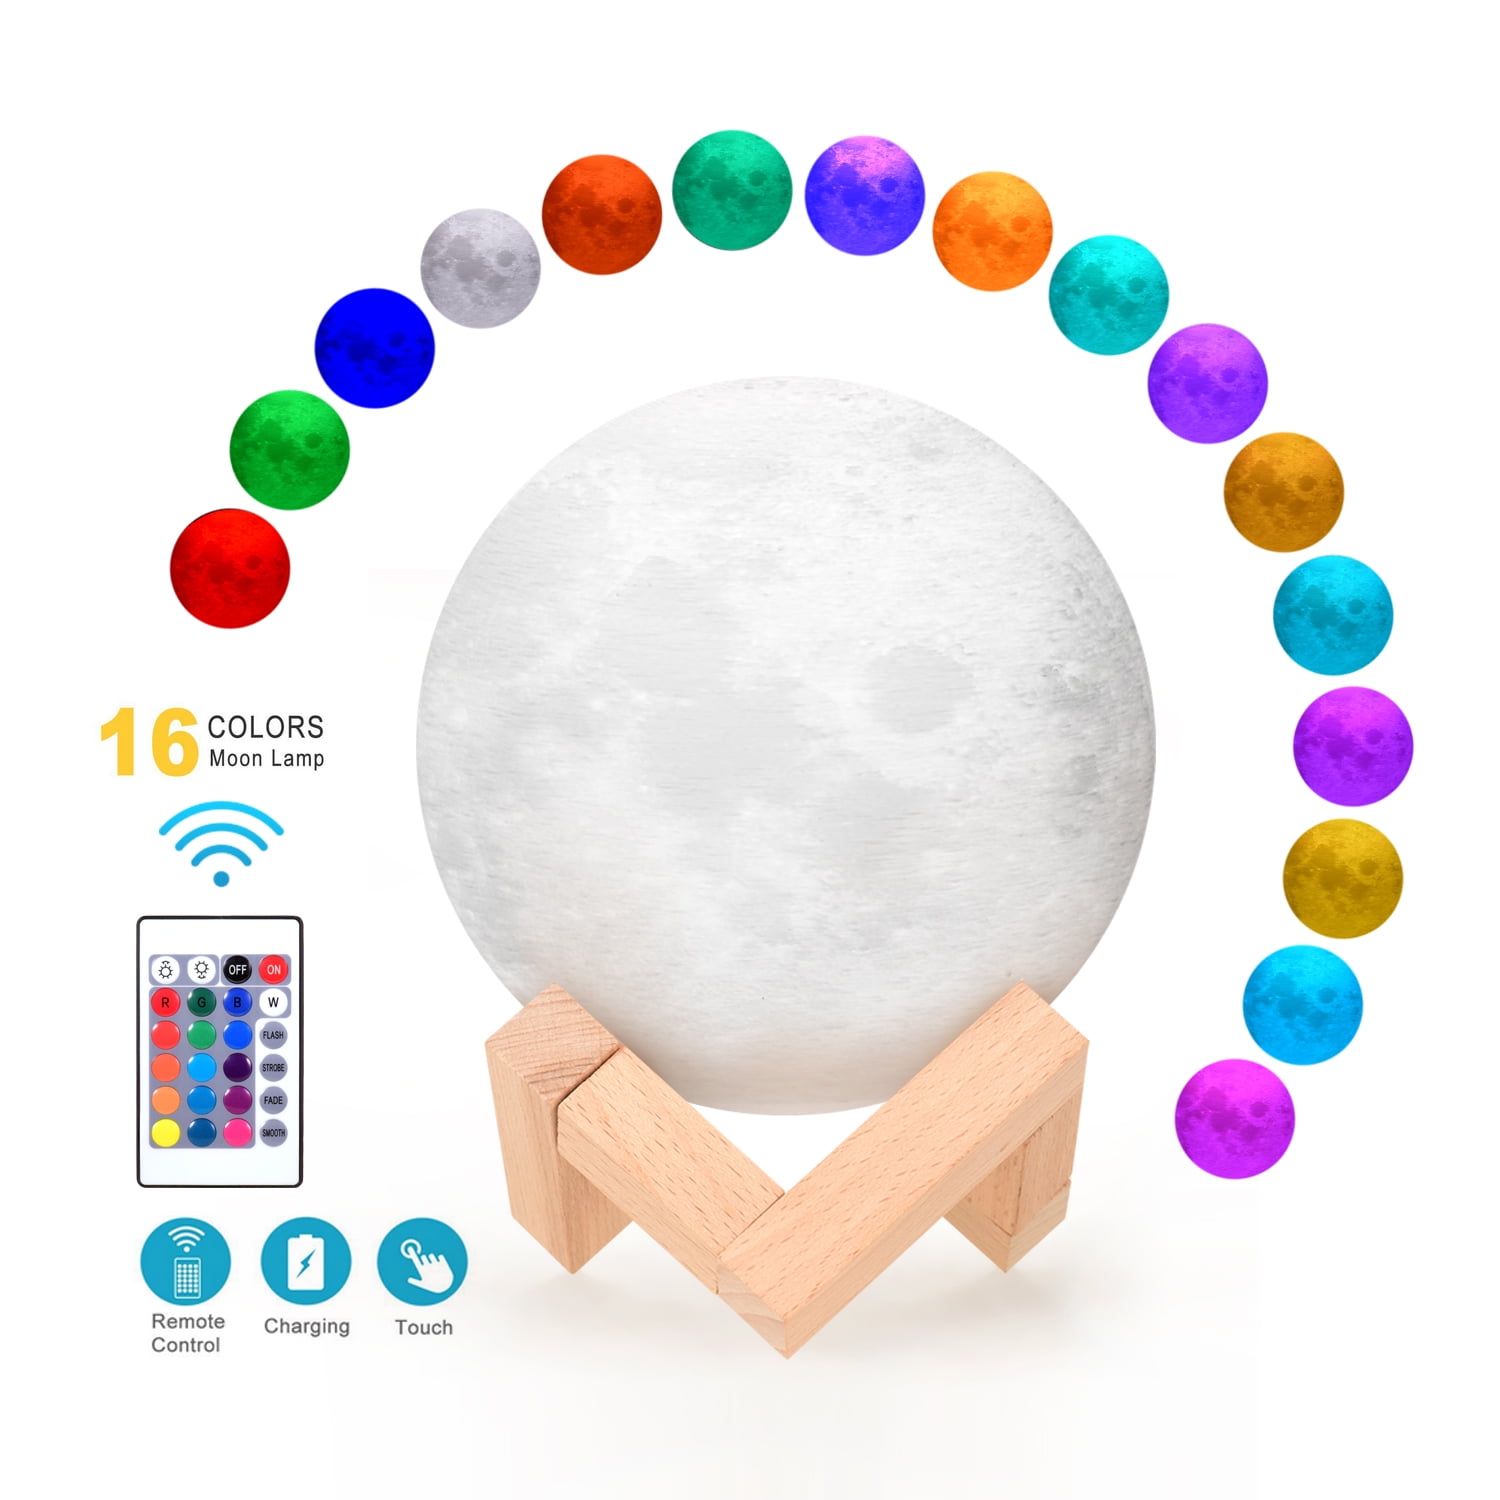 Moon Lamp Light Personalised Photo 15cm 18cm 20cm Dimmable Engraved LED 3D Moon Lamp with Stand,USB Charging,16 RGB Color 10cm